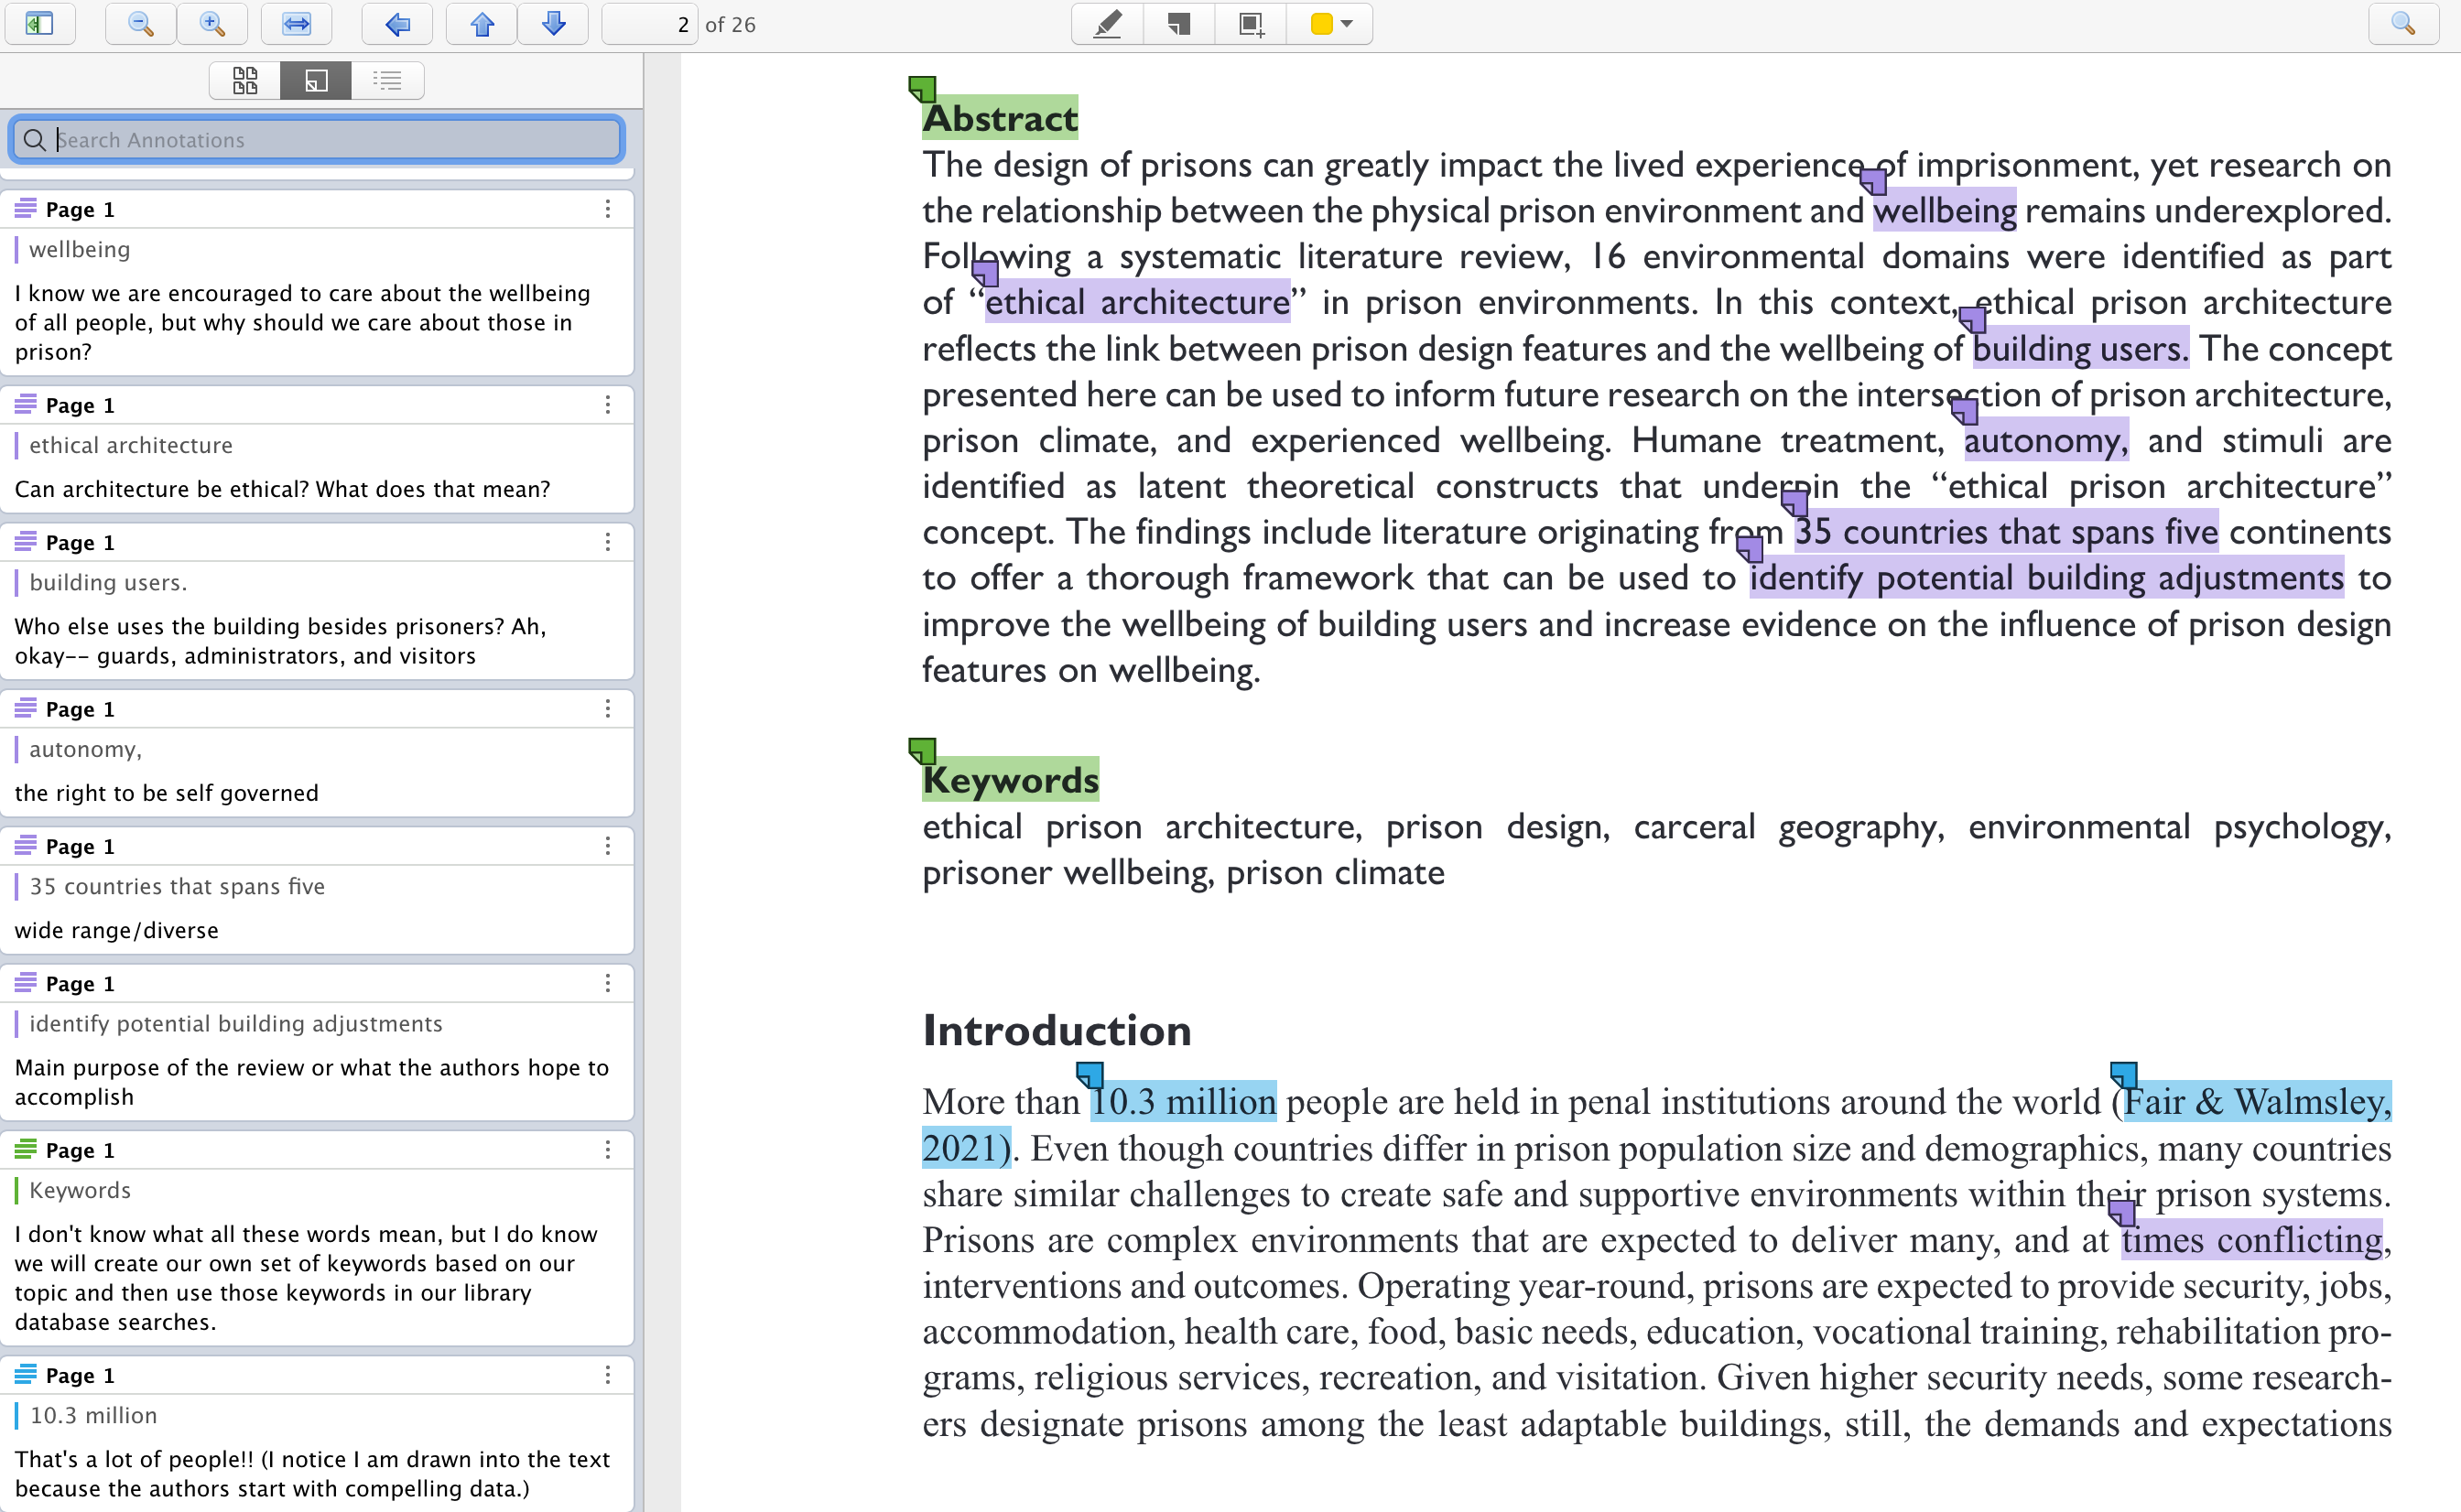 An image of a digital annotation program. The program highlights specific words and phrases of a text, and then organizes a reader's notes about them in a separate window on the left margin with comments such as "Can architecture be ethical? What does this mean?"